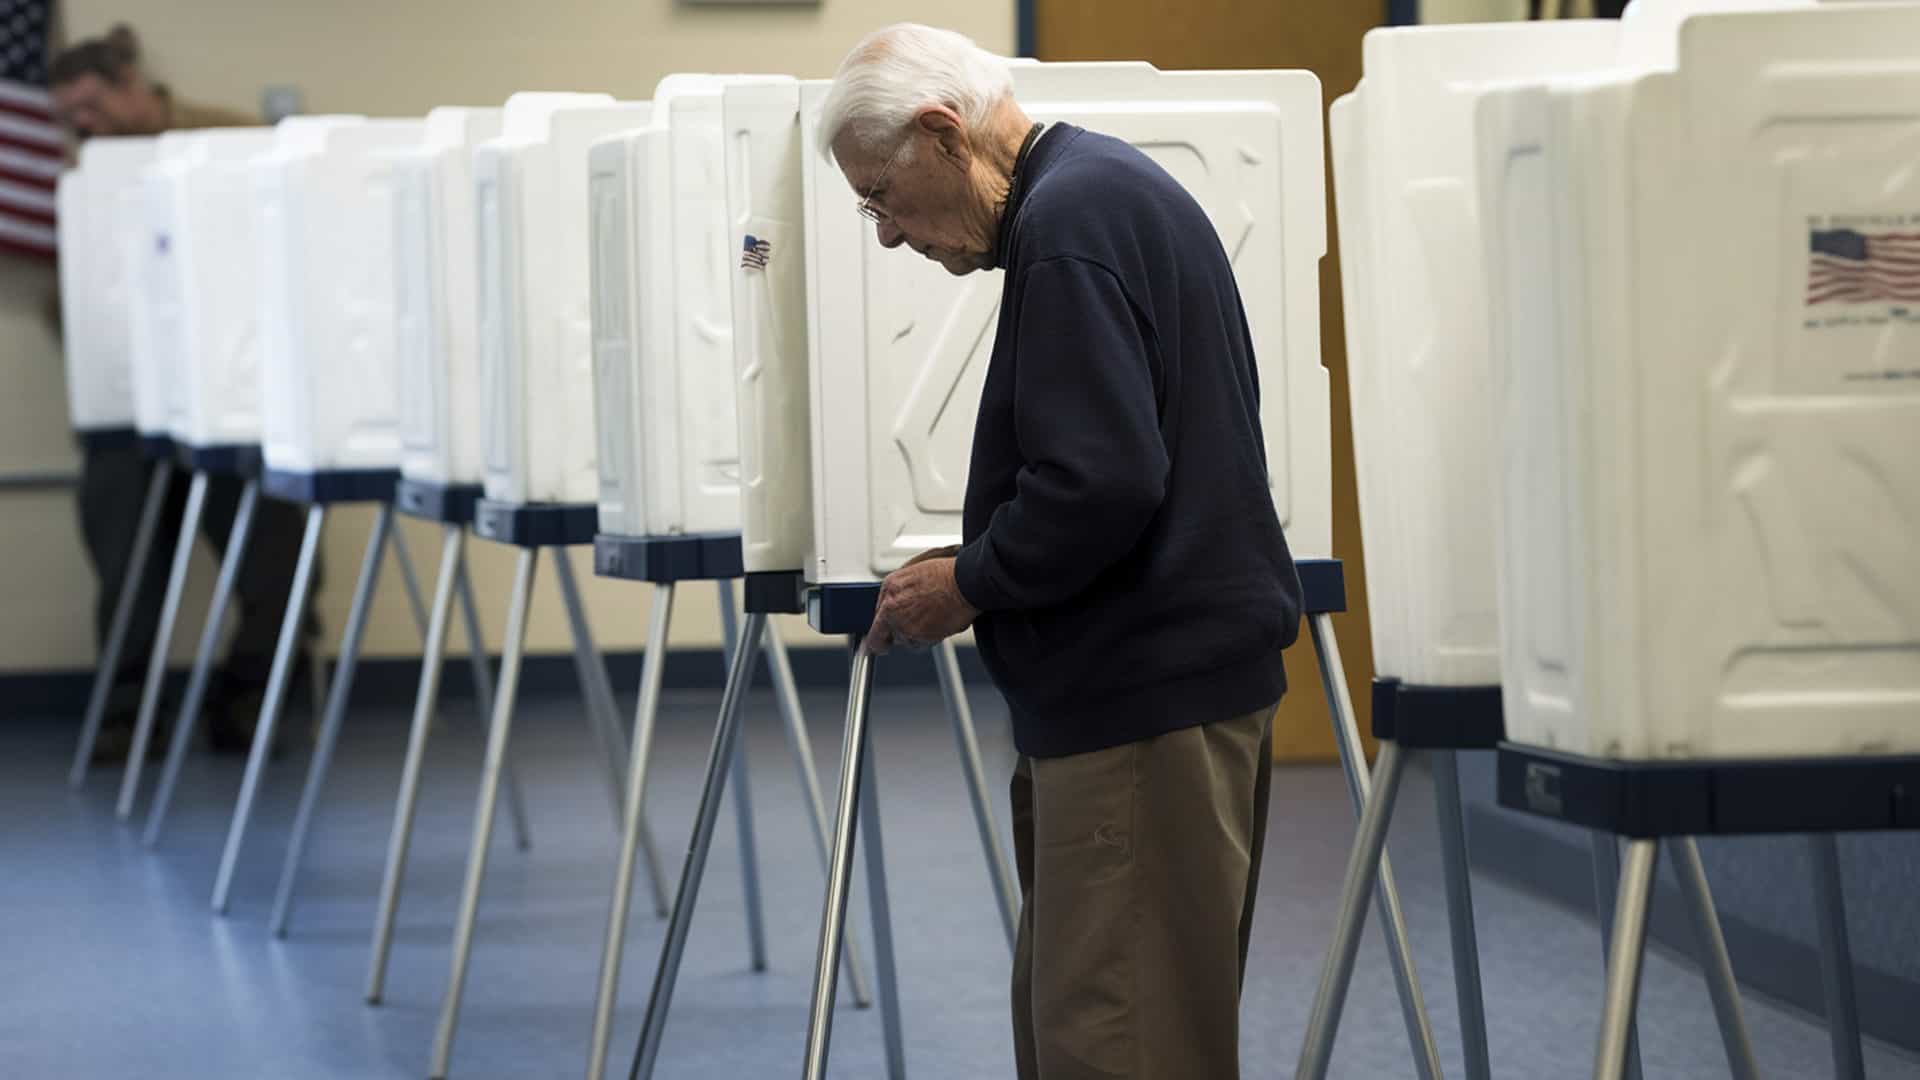 Low Voter Turnout on Election Day in Idaho